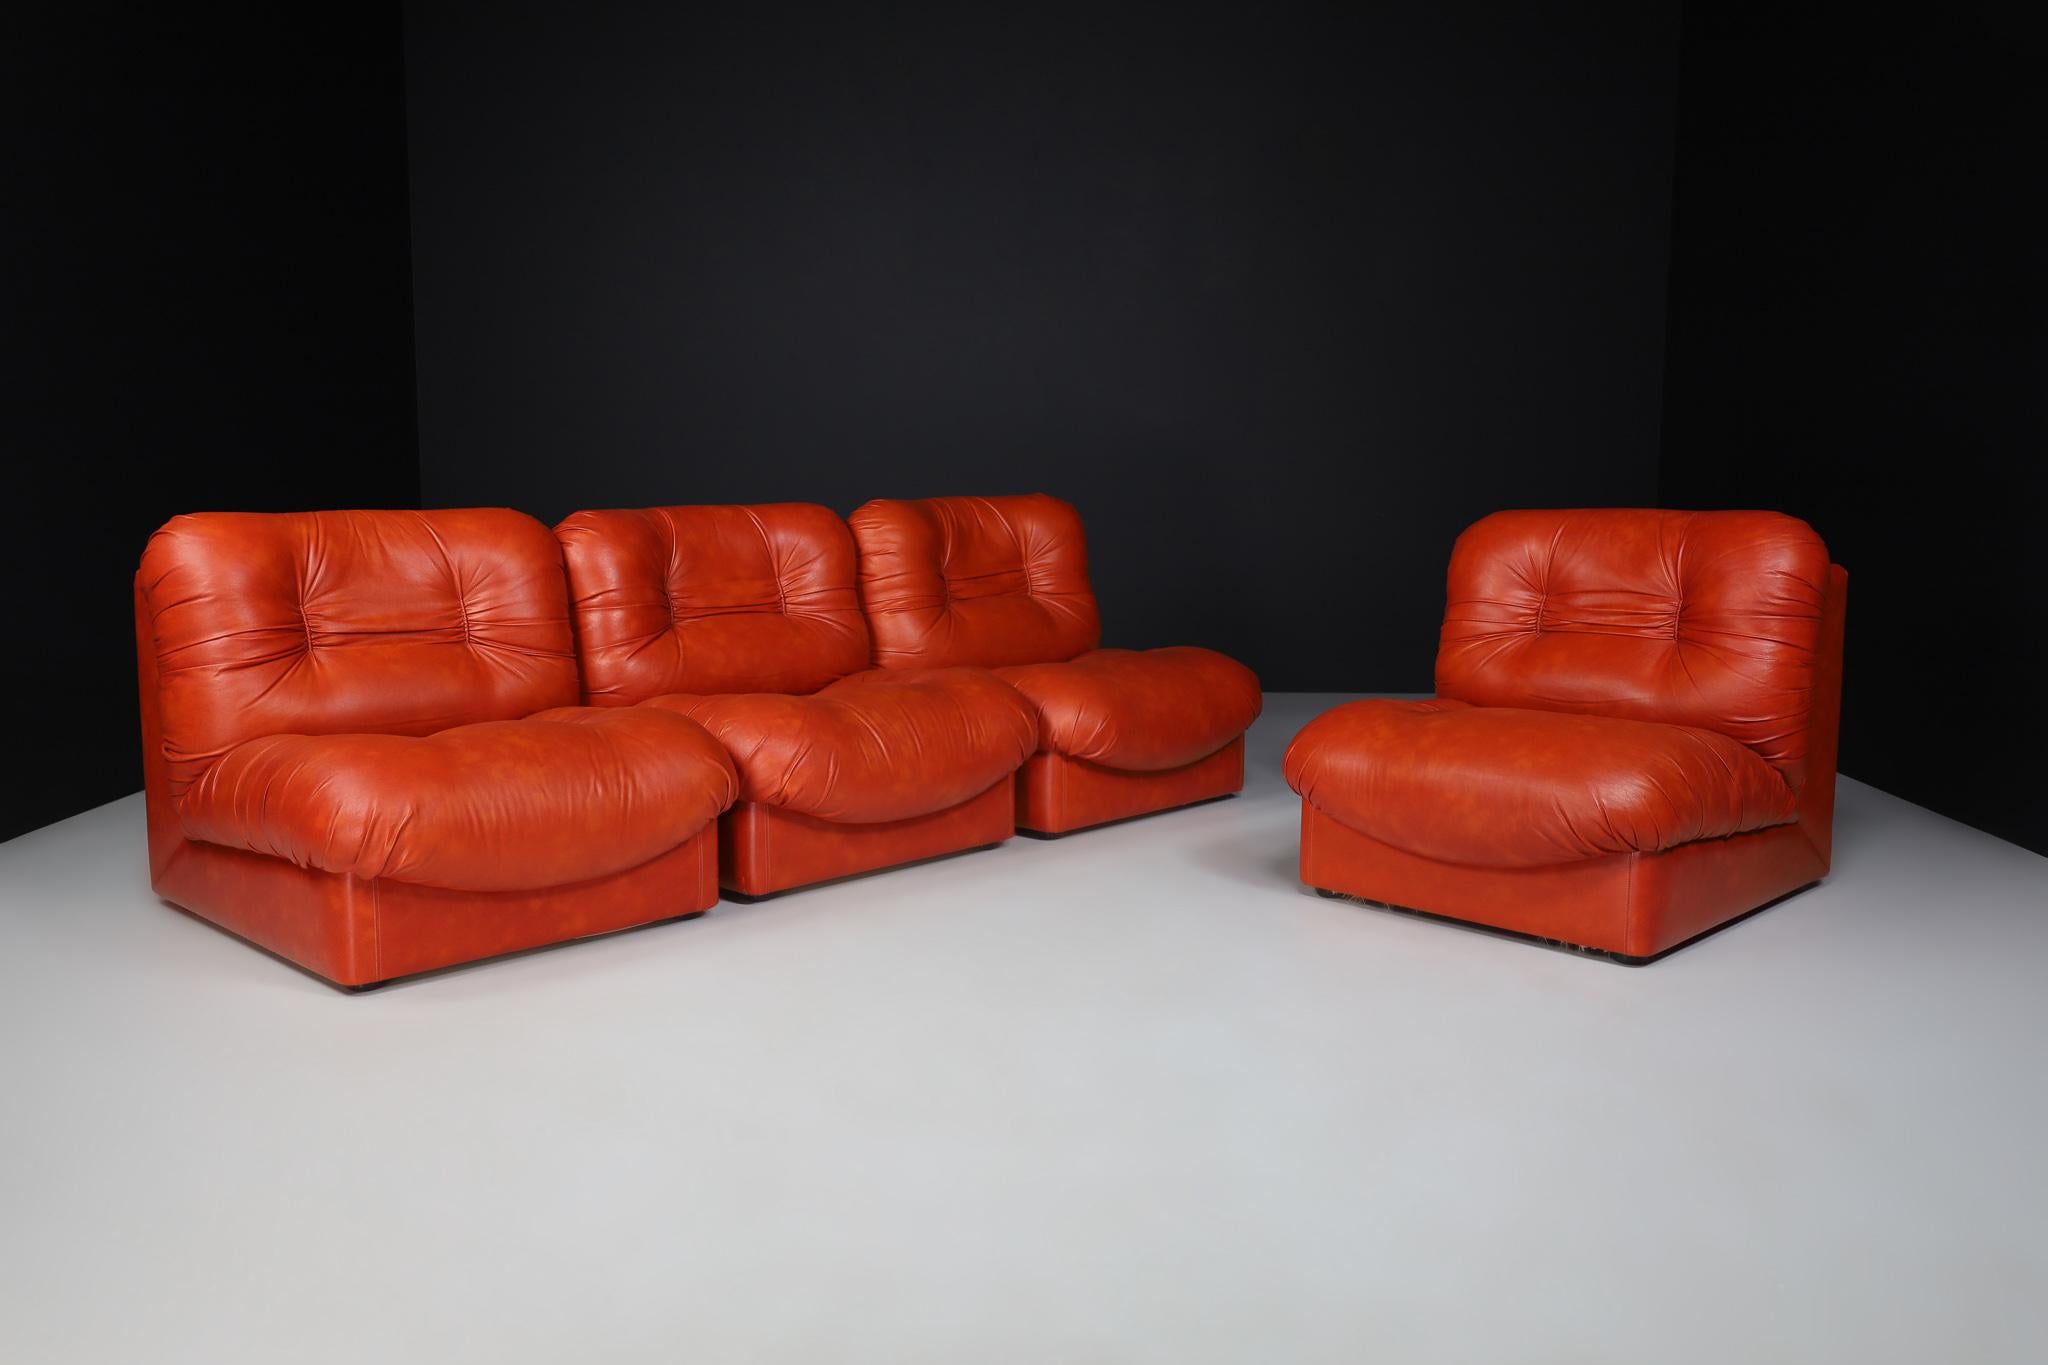 Set of Four Red Leather Mid century lounge chairs/sofa, Italy 1970

This design is characterized by an L-shaped form based on two connected tufted cushions. That gives the chair a voluminous and playful appearance. We currently have four items in